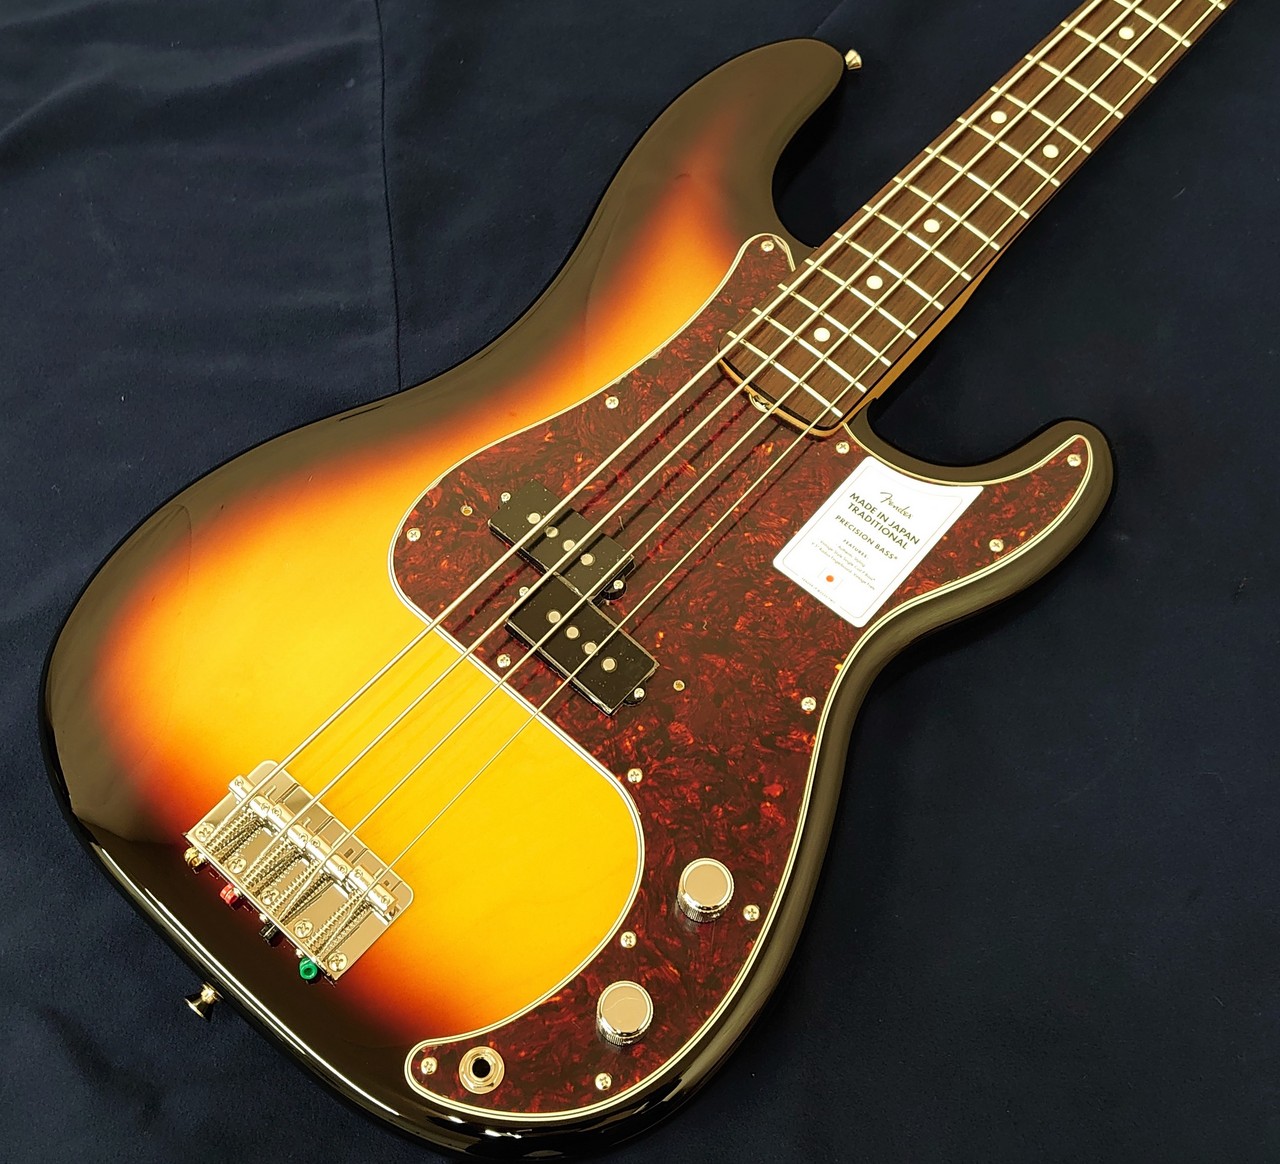 Fender　Made　Traditional　Japan　Japan　＜フェンダージャパン＞　in　Sunburst-　60s　Precision　Bass　3-Color